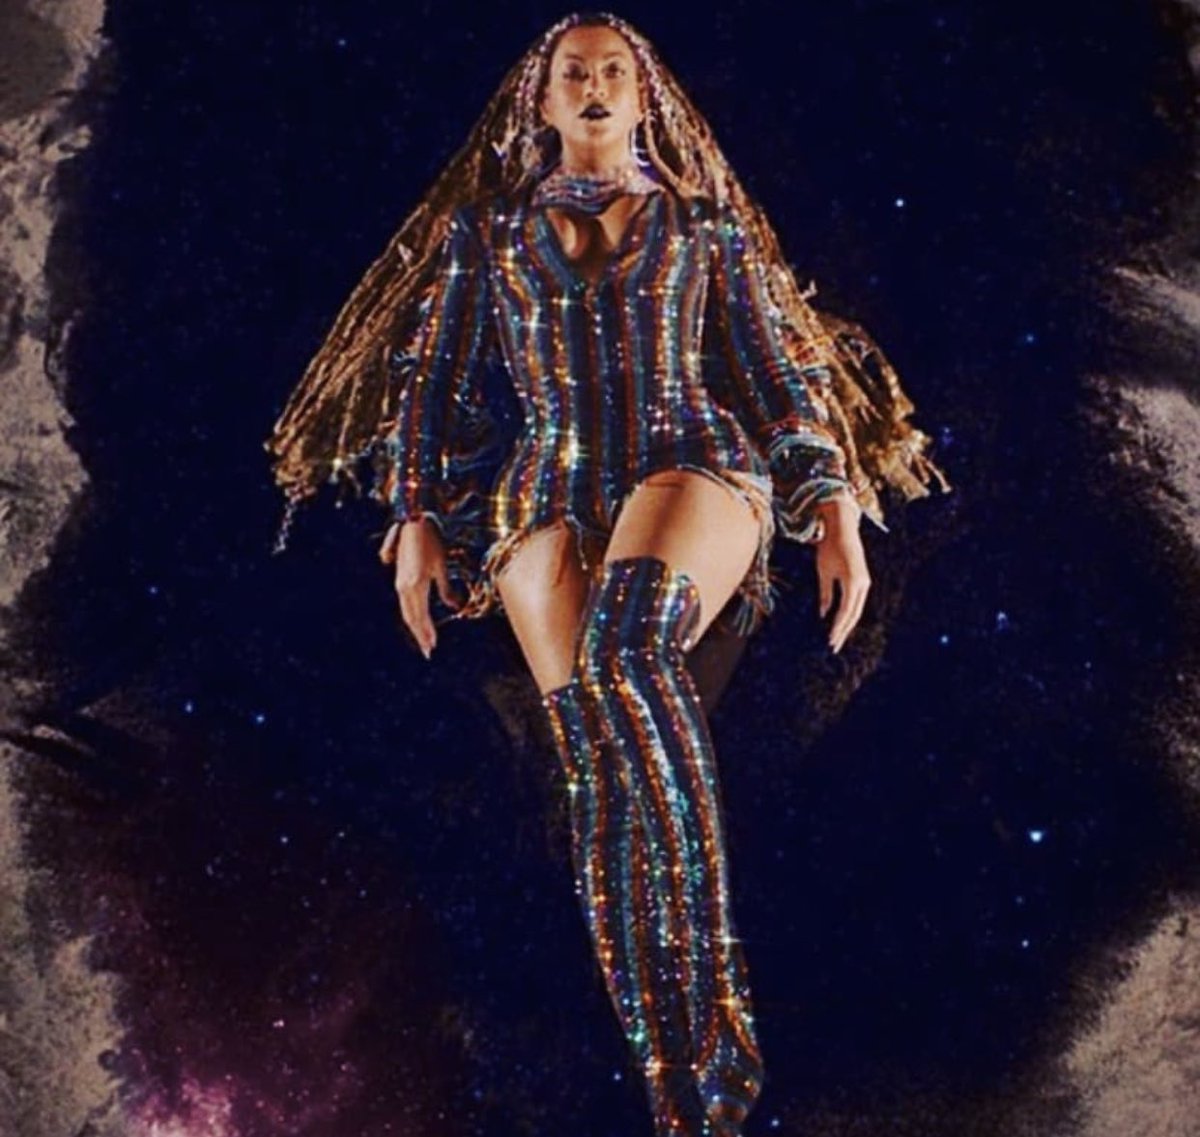 beyonce-in-design-by-vrettos-vrettakos-for-black-is-king